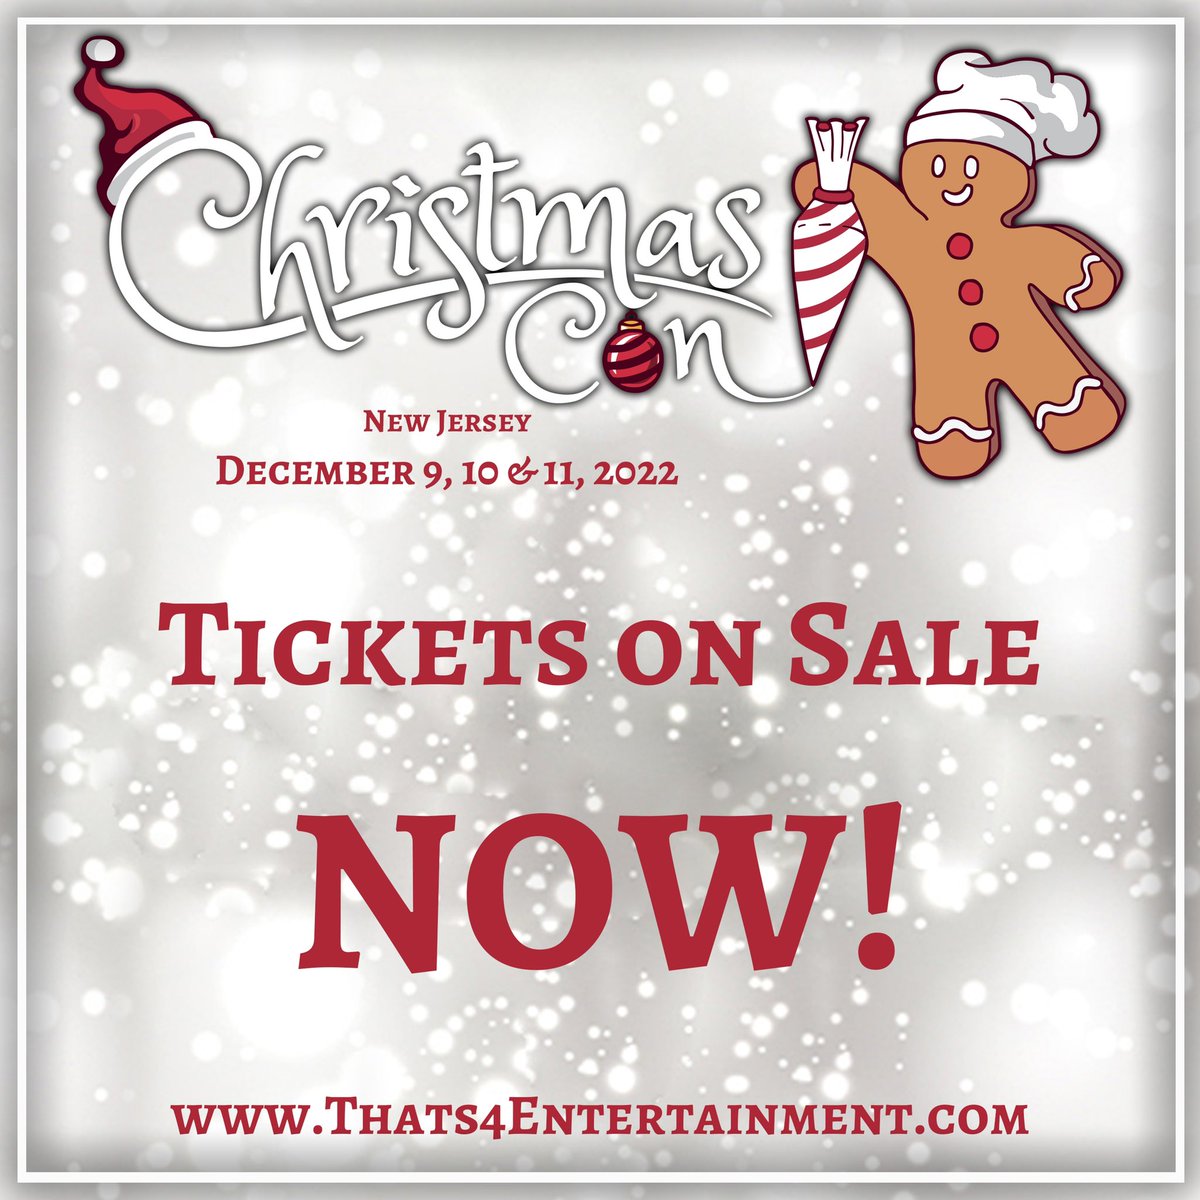 🥳 Tickets for #ChristmasCon2022NJ are on sale NOW!!! thats4entertainment.com/new-jersey 🎄We had so much fun this December, we can’t wait to do it all again! Get your tickets now and we will see you there. ❤️Merry Christmas Con!